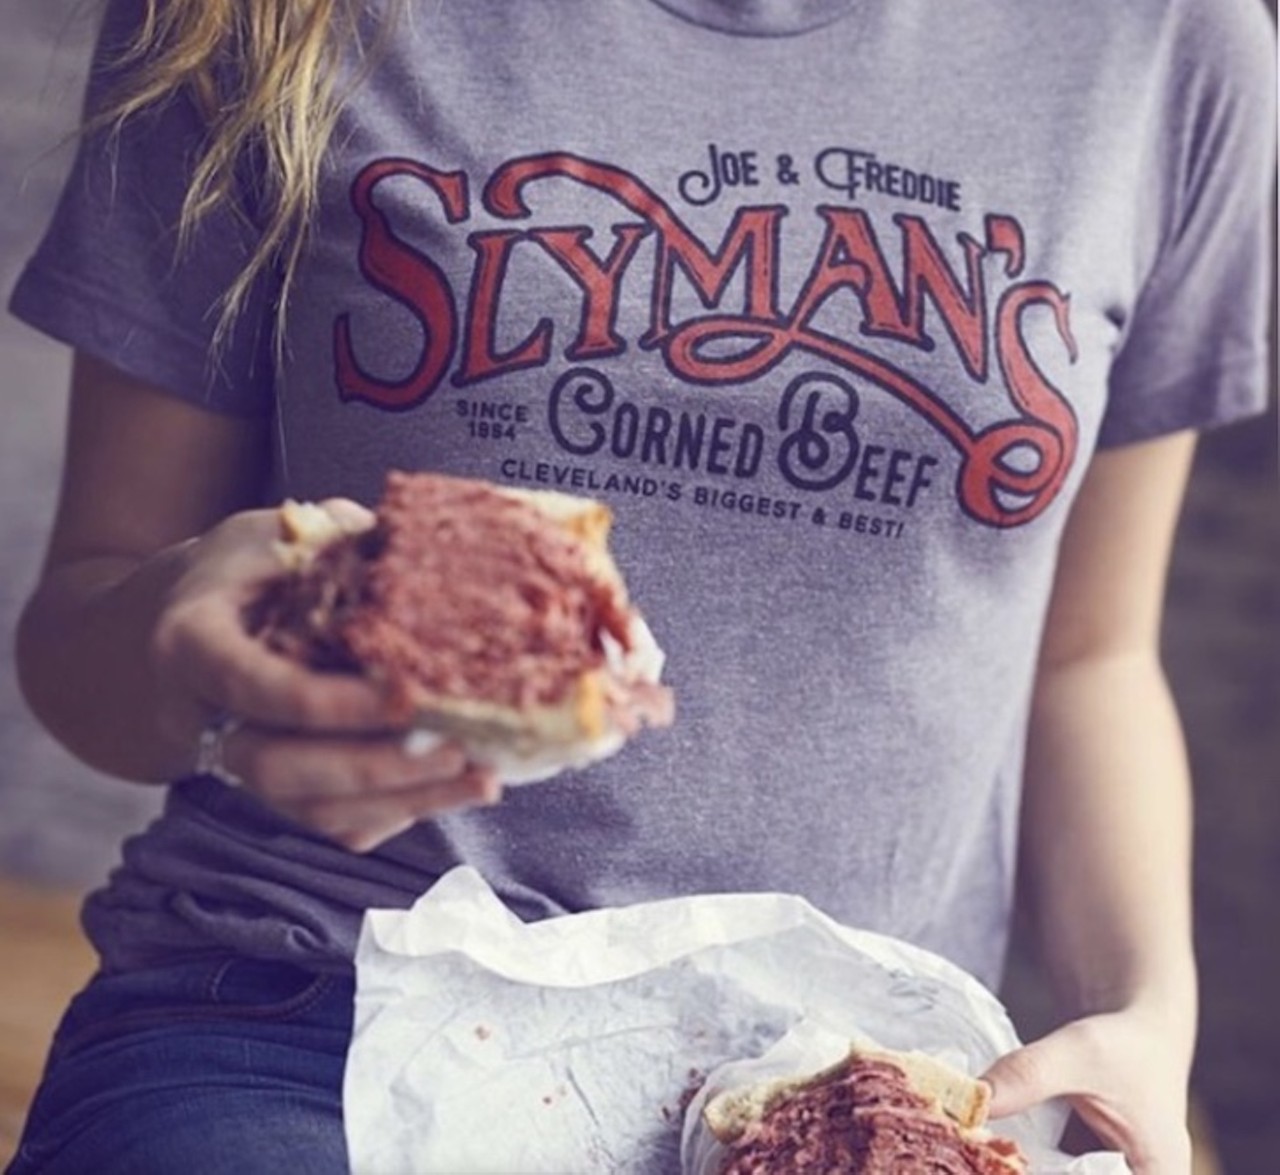 Slyman&#146;s Restaurant
3106 Saint Clair Ave. NE,  216-621-3760
Choice quote: &#147;WOAH . I'm so mad that I haven't been here before!! I work right down the street!
My coworker suggested we get some sandwiches from here and IM SHOOK!
It's a smaller building so when you're driving make sure you don't miss it! You can park on the street!&#148;-Ashley R.
Photo via cleclothingco/Instagram